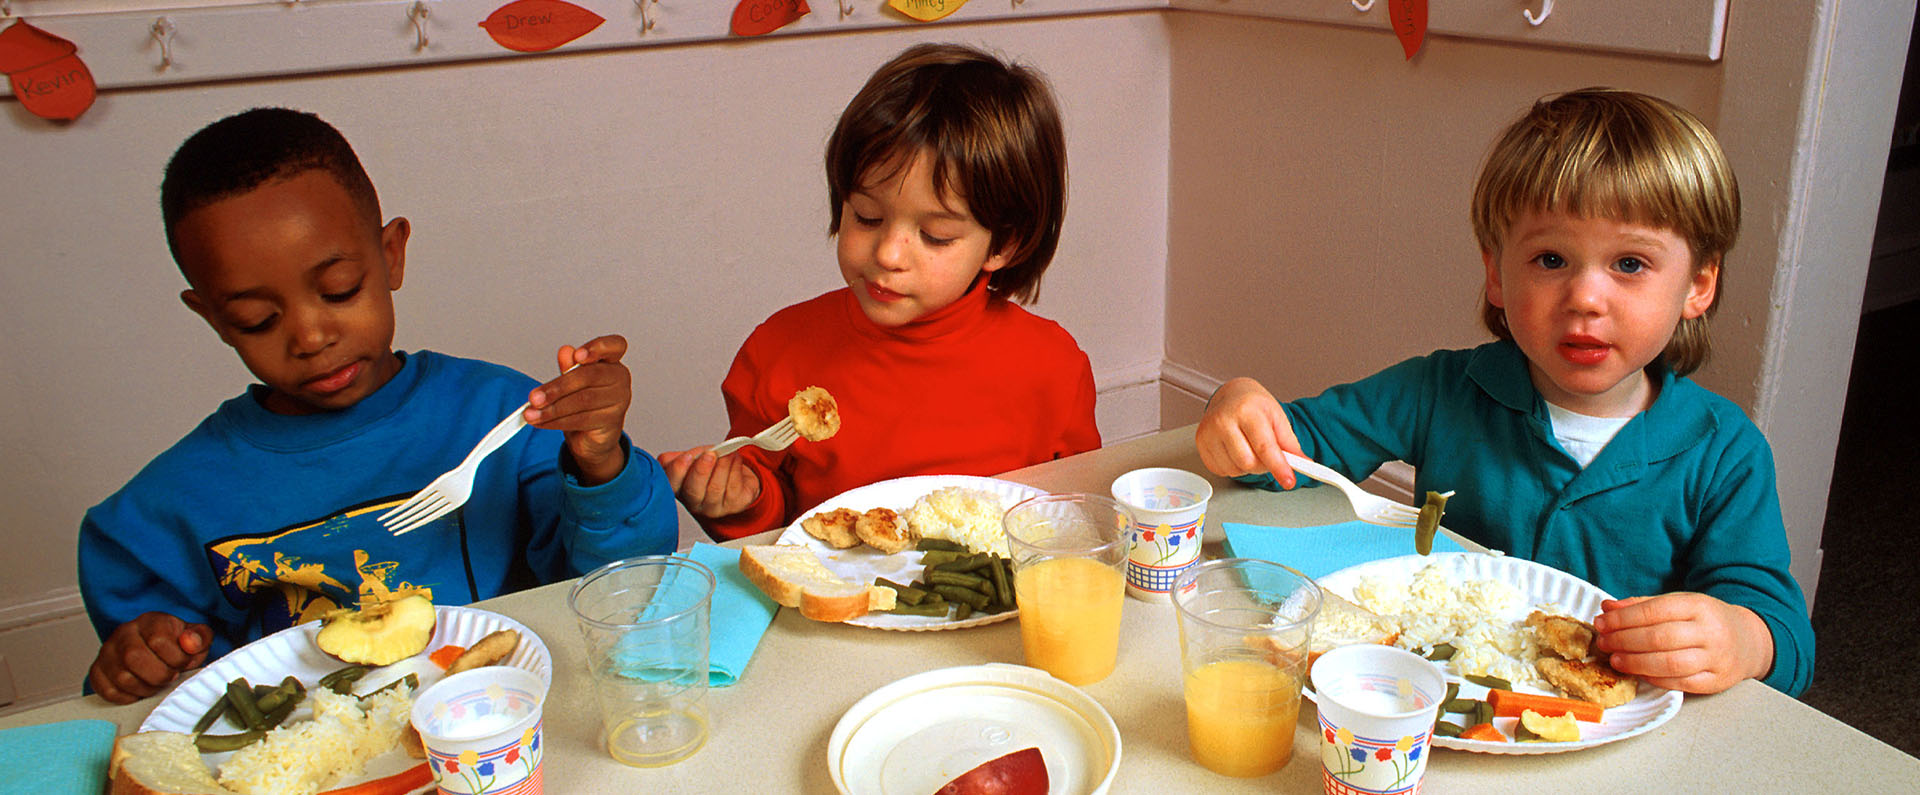 Three young children eating lunch in a classroom